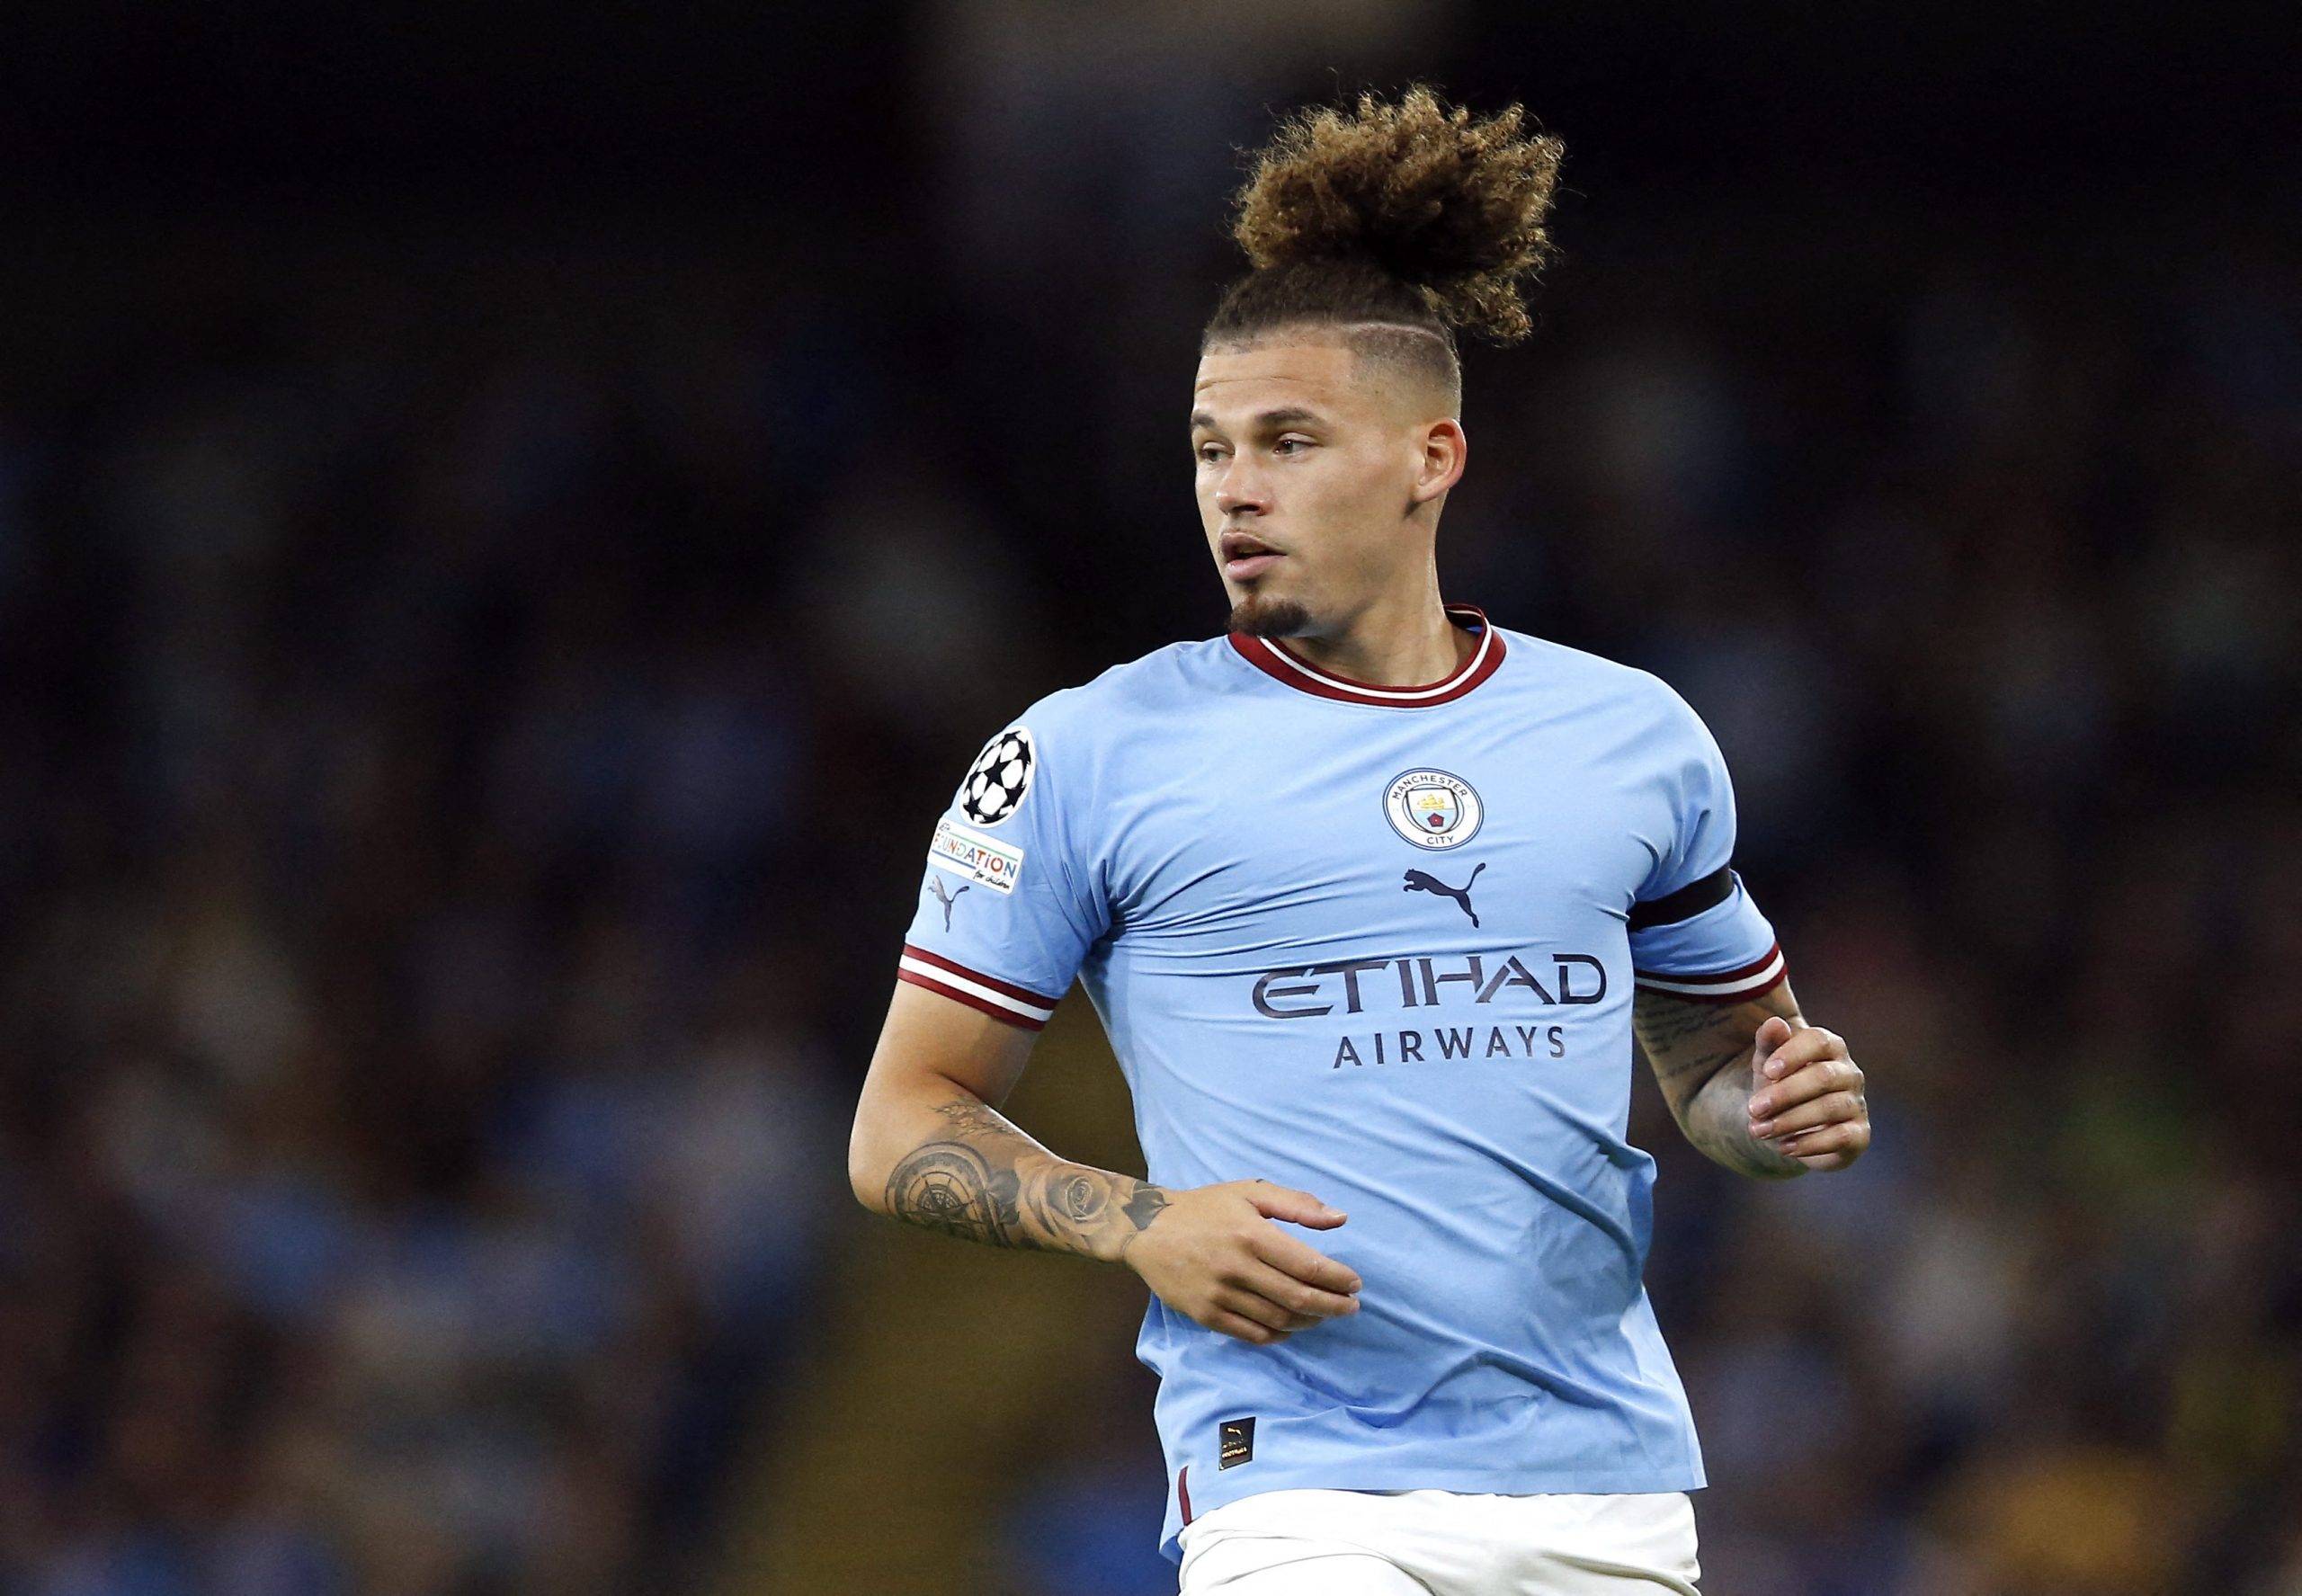 Man City: Robinson says Phillips 'will be gutted' after injury - Manchester City News